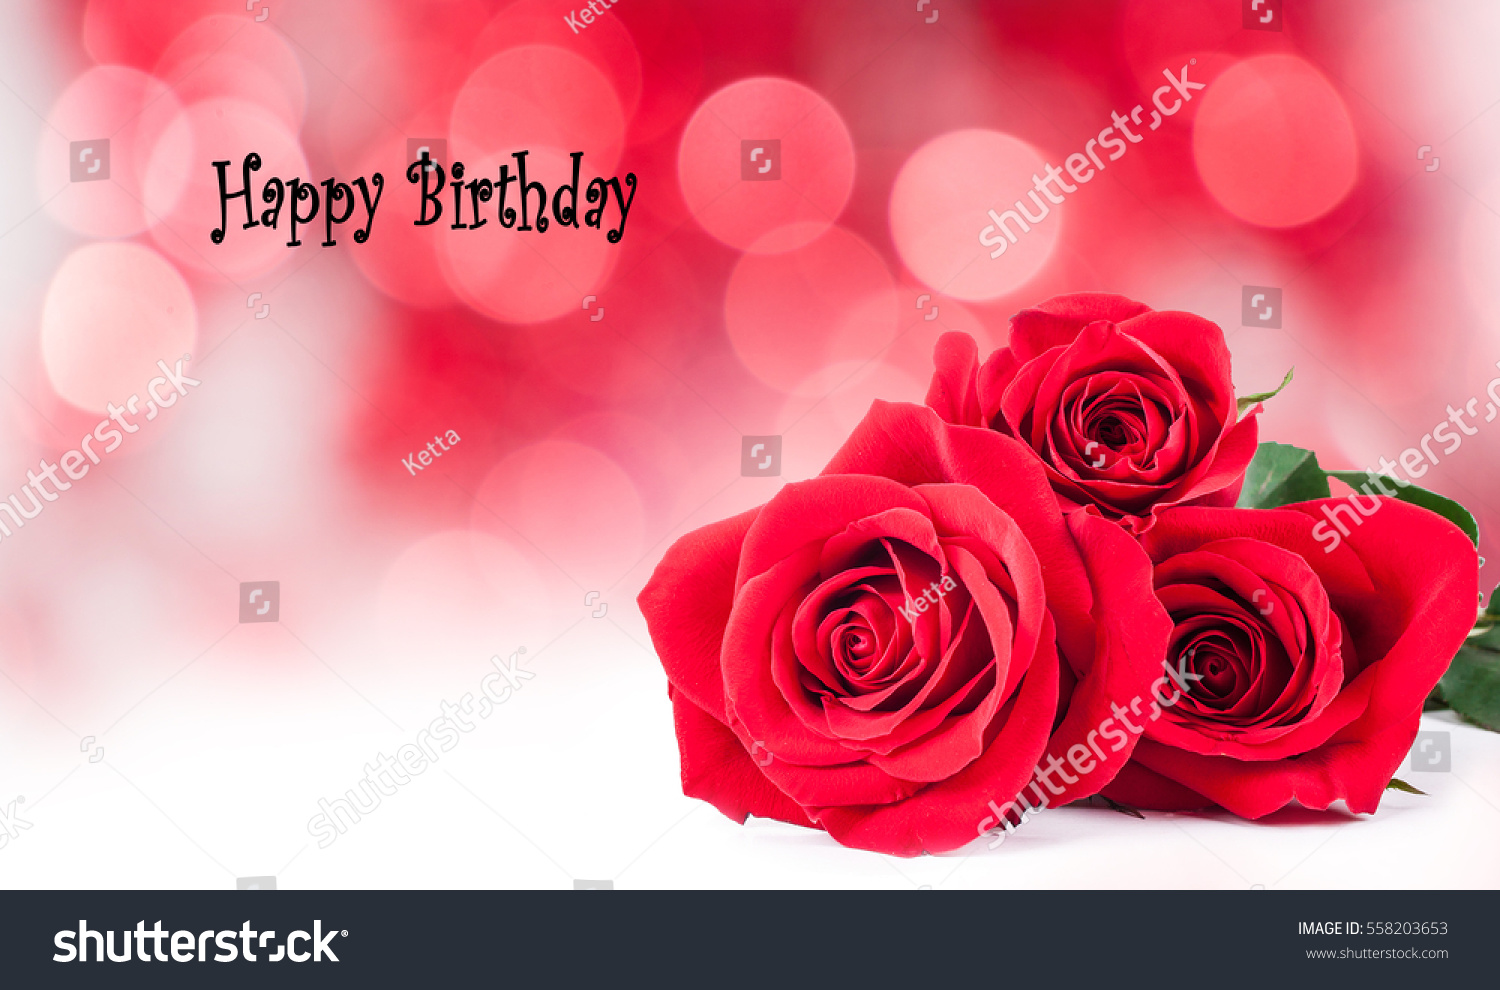 Birthday Cards Red Roses Stock Photo Shutterstock